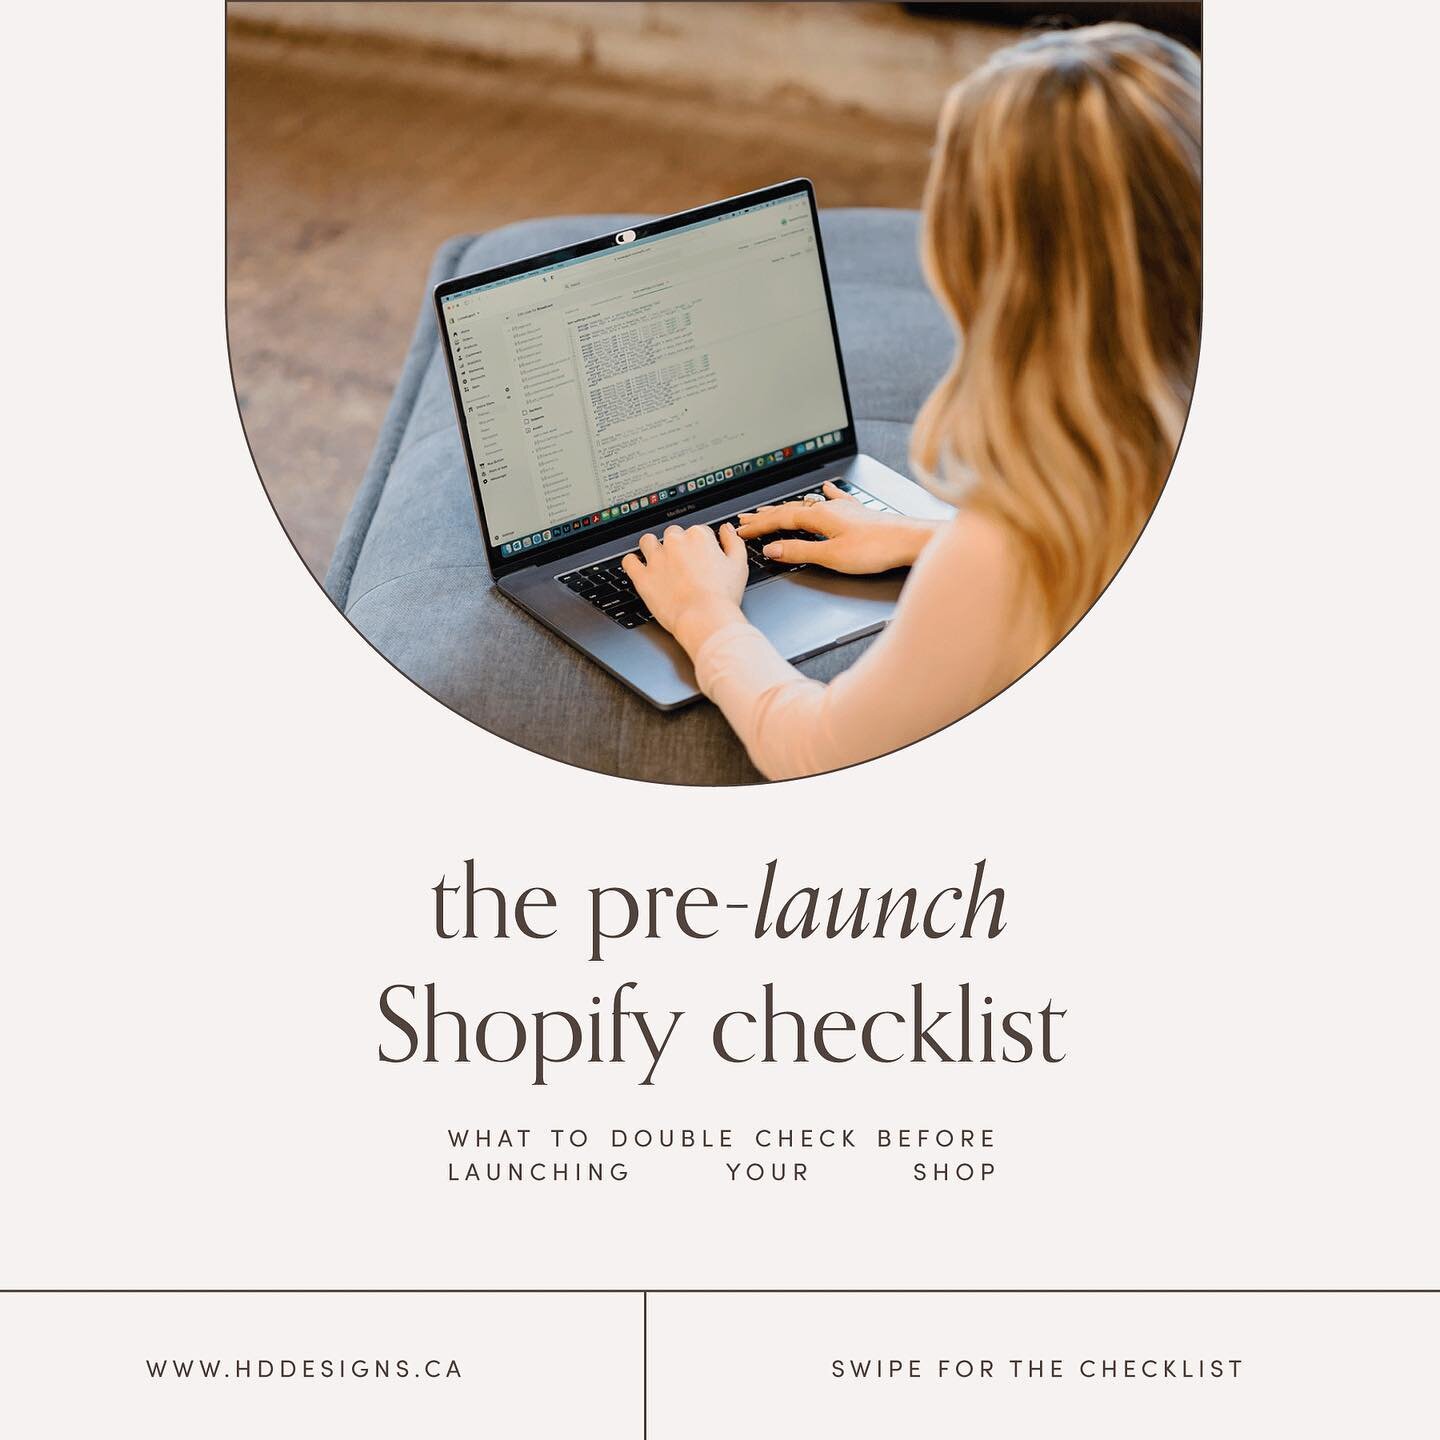 Here is a quick Shopify pre-launch checklist before your store is live ✨

✔️Links
Test all links! Make sure all of your navigation links, buttons, in-line links and social icons are set up and working. Also making sure the proper link leads to the co